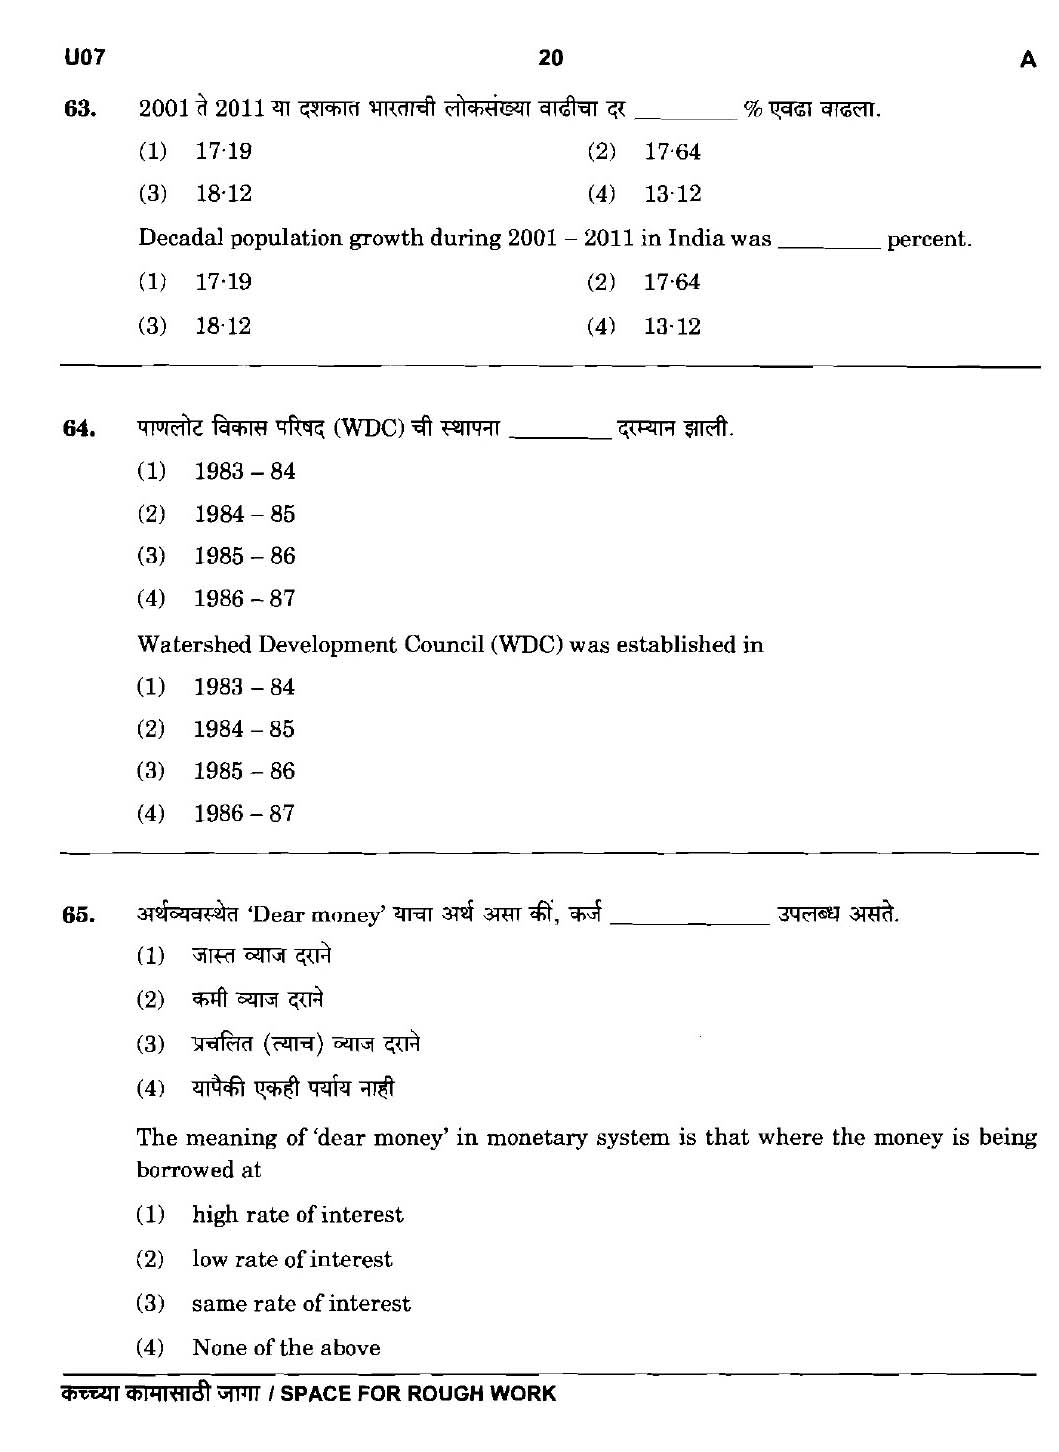 MPSC Agricultural Services Preliminary Exam 2016 Question Paper 19